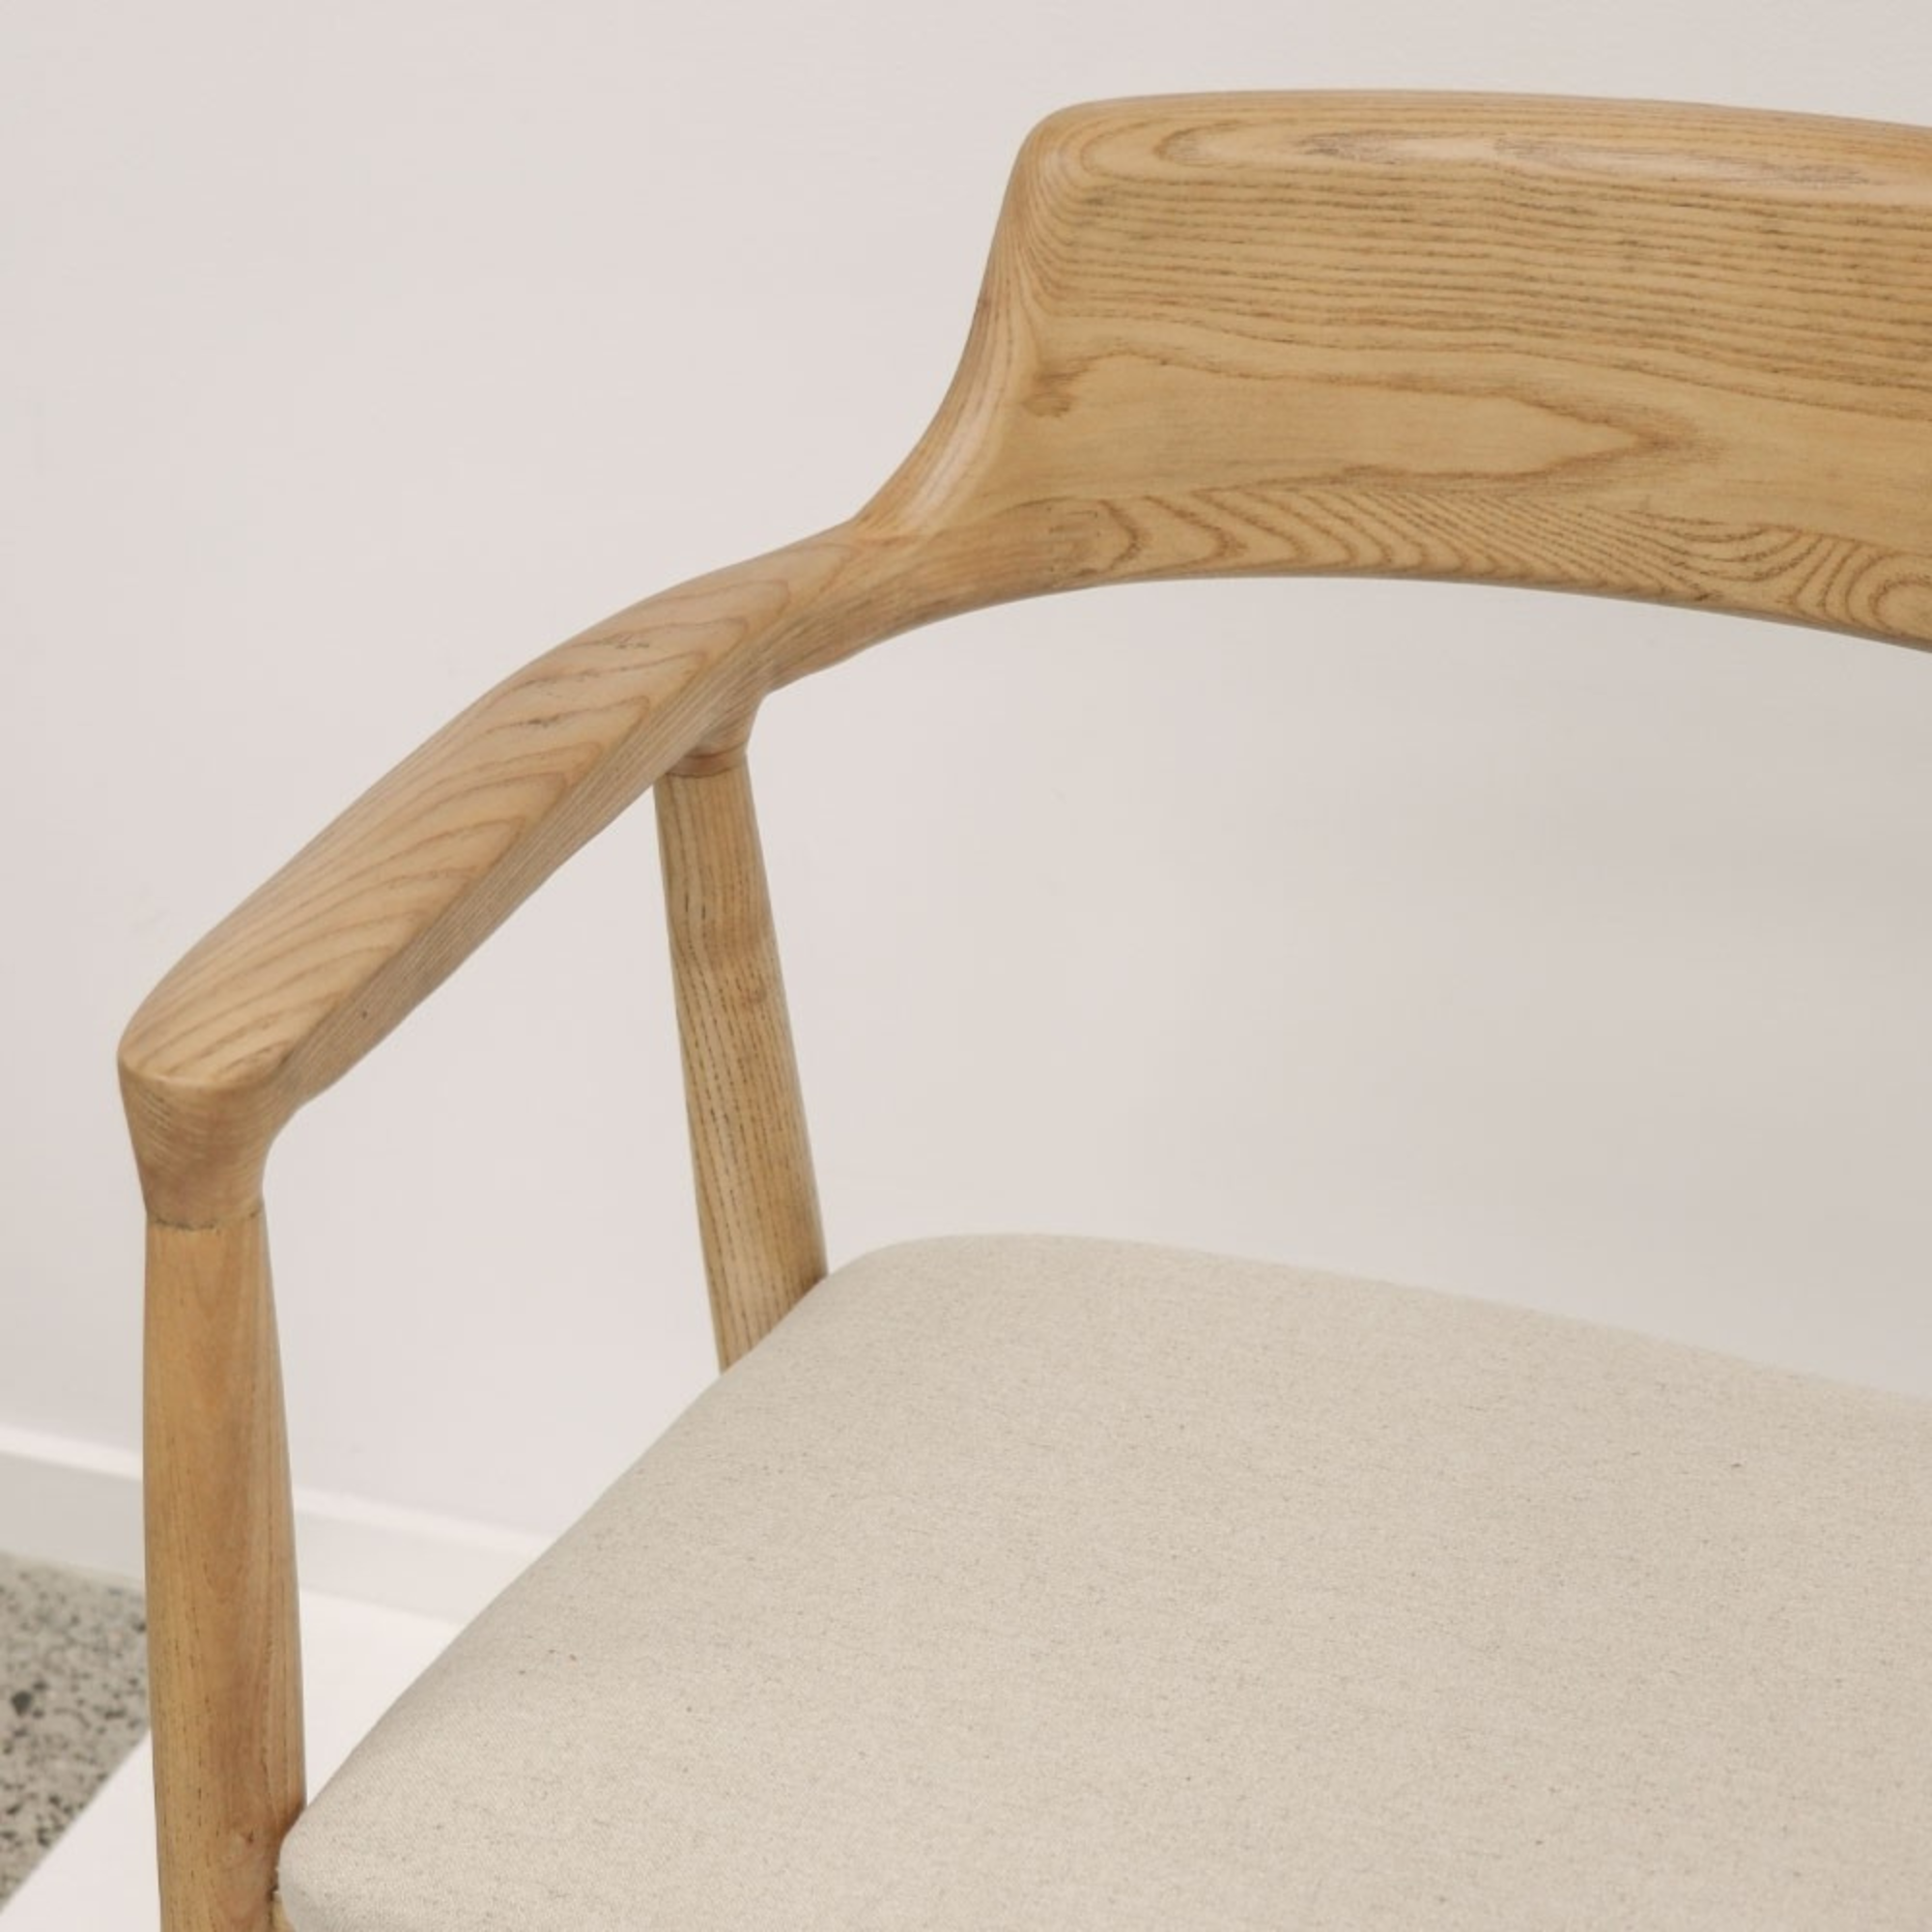 EALING DINING CHAIR | NATURAL LINEN LOOK SEAT